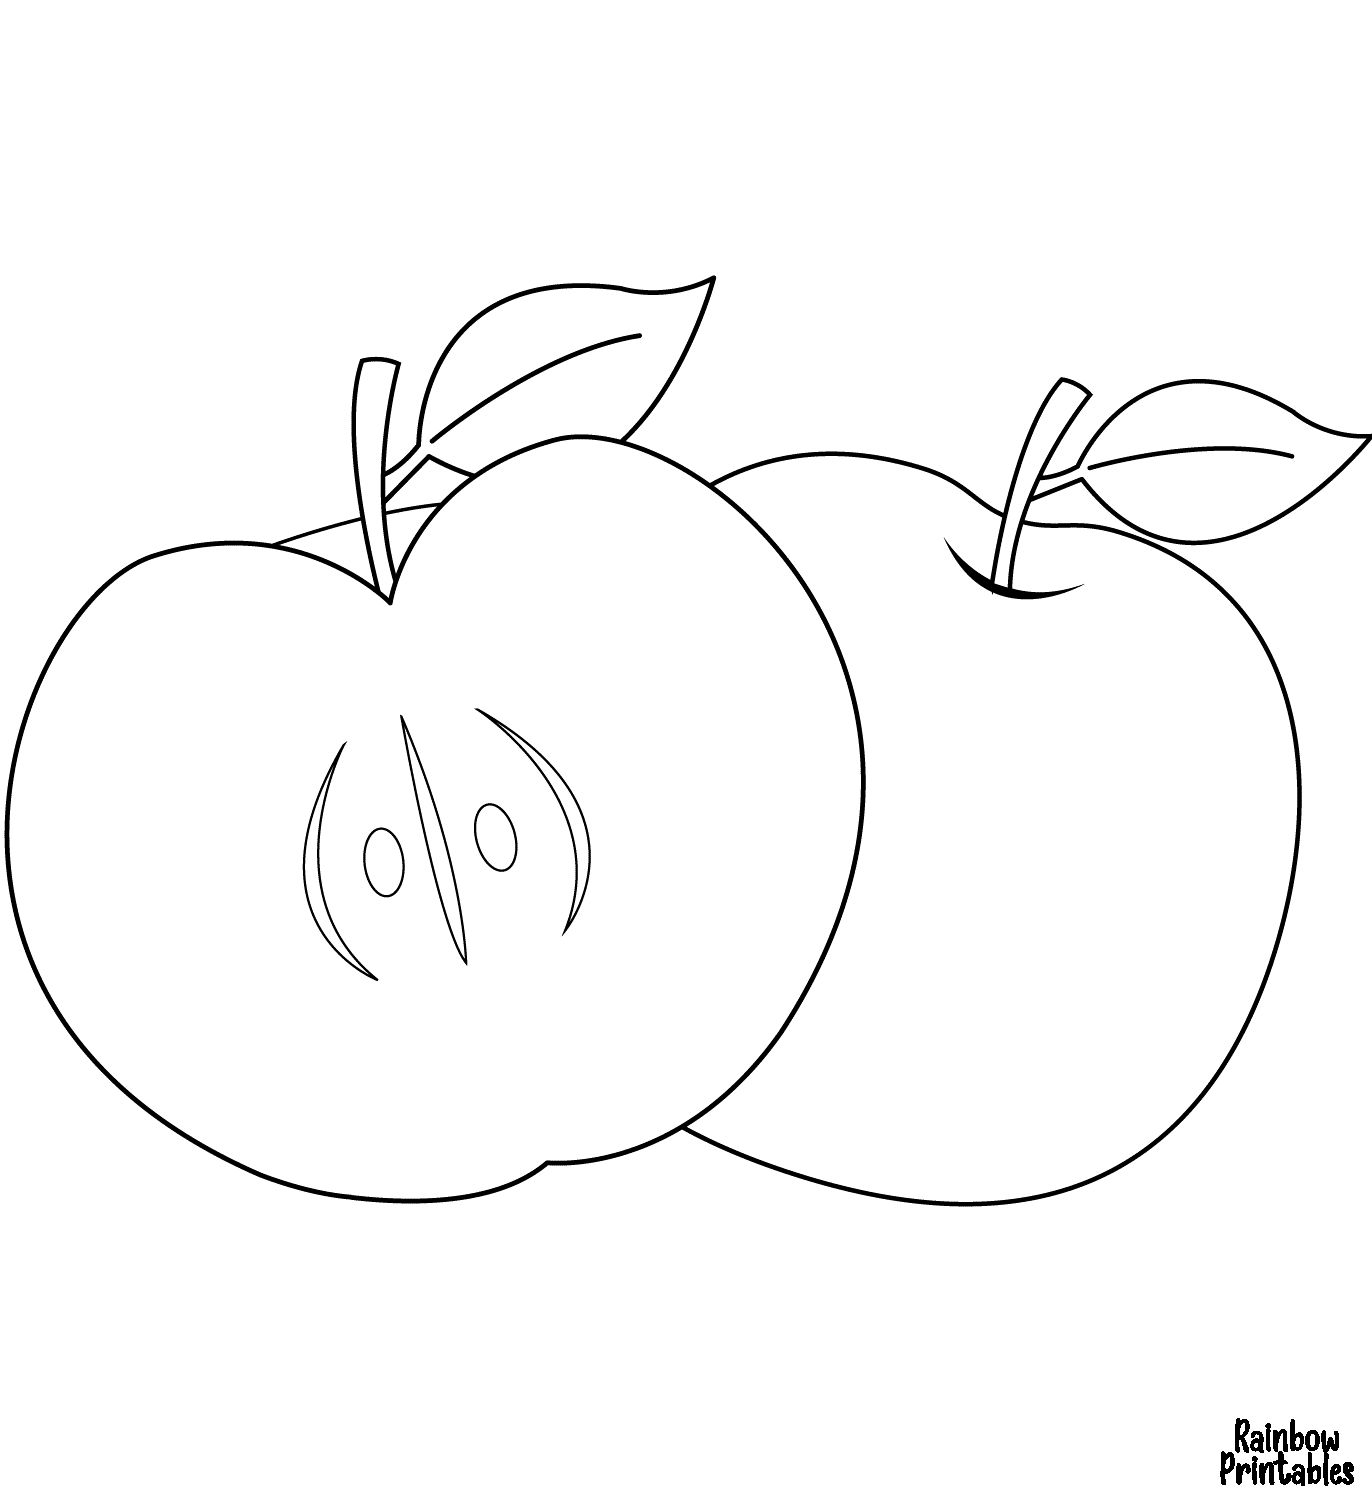 Line Drawing TWO APPLES Coloring Pages for Kids Art Project